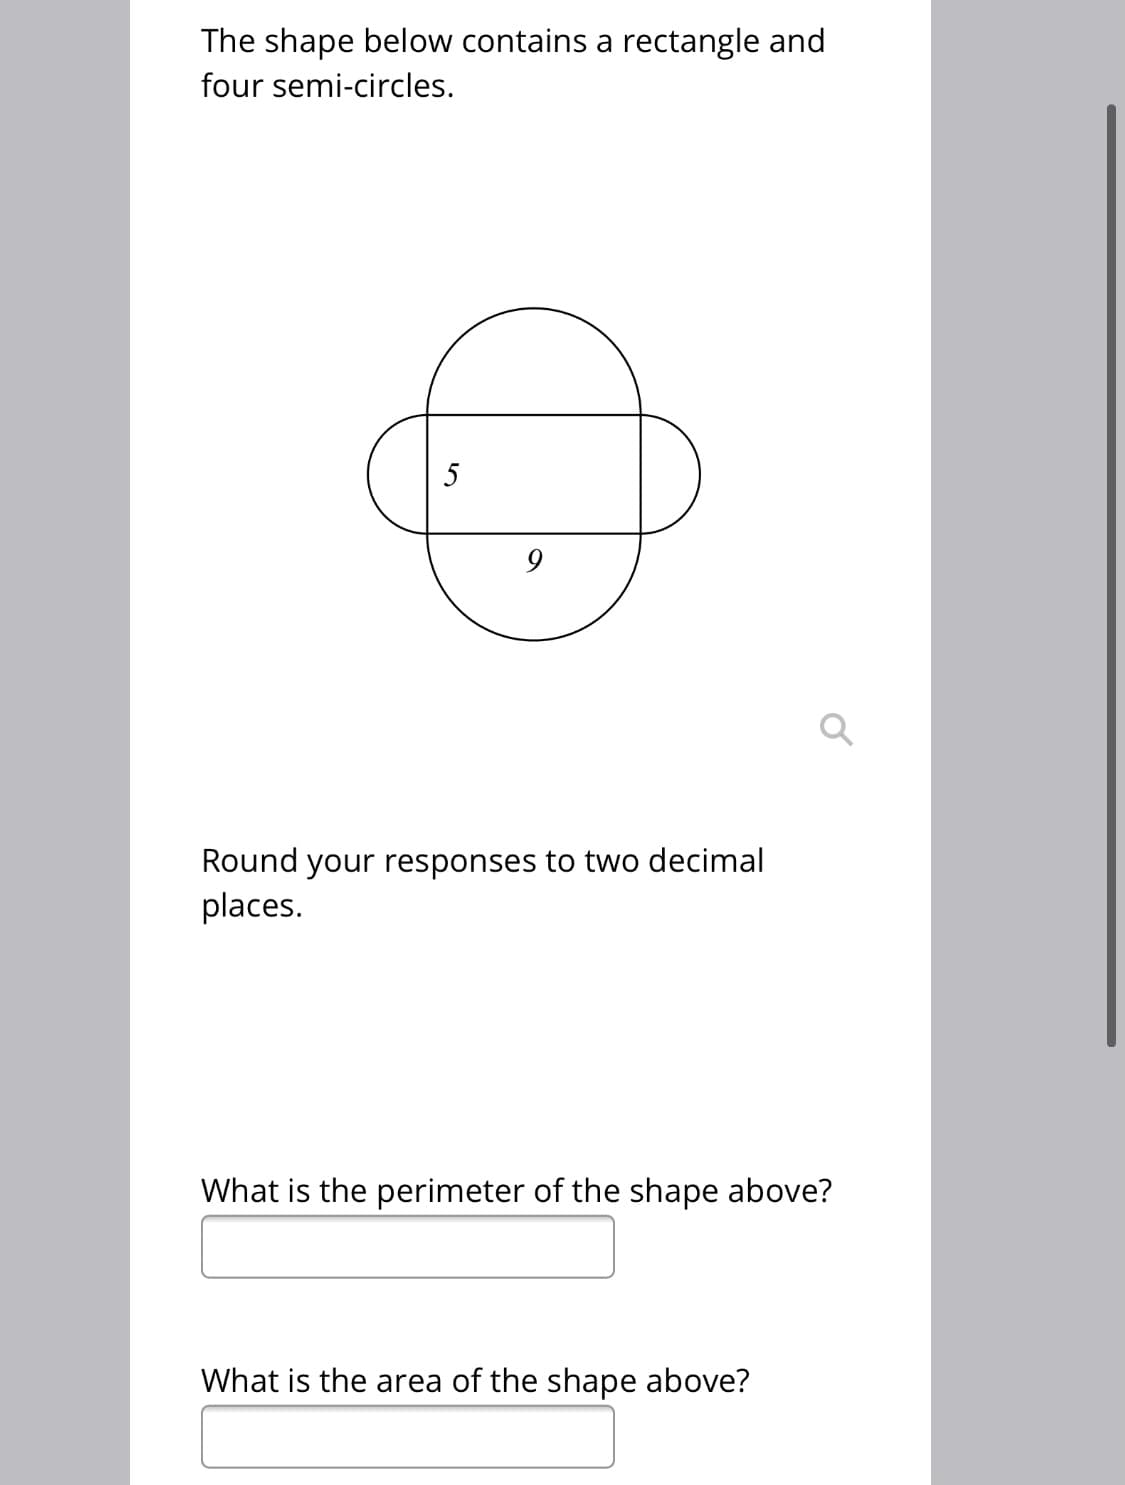 The shape below contains a rectangle and
four semi-circles.
5
Round your responses to two decimal
places.
What is the perimeter of the shape above?
What is the area of the shape above?
